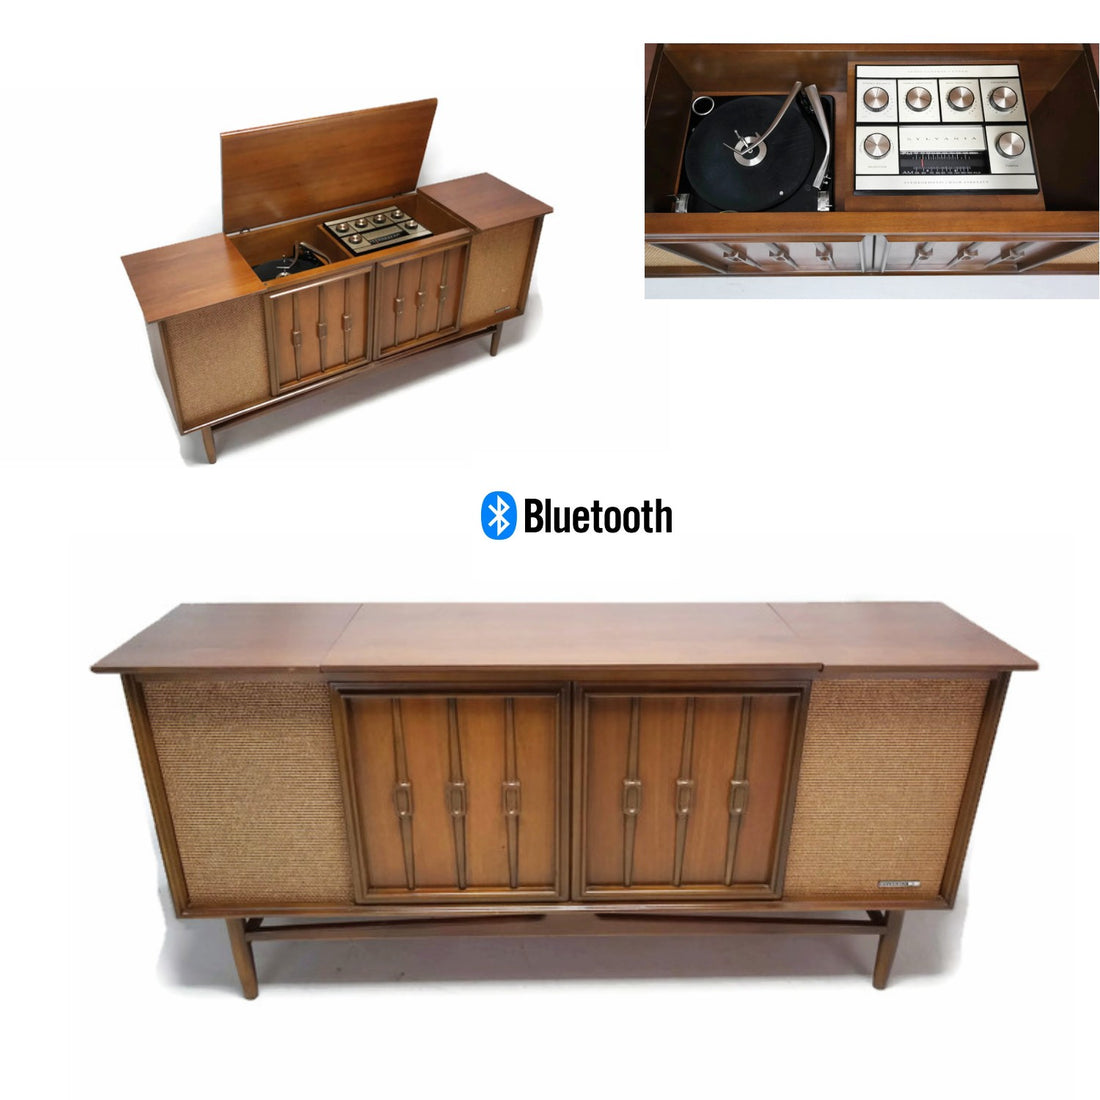 The Vintedge Co™ - SYLVANIA Vintage Mid Century Modern Stereo Console Record Player Changer AM FM  - Bluetooth